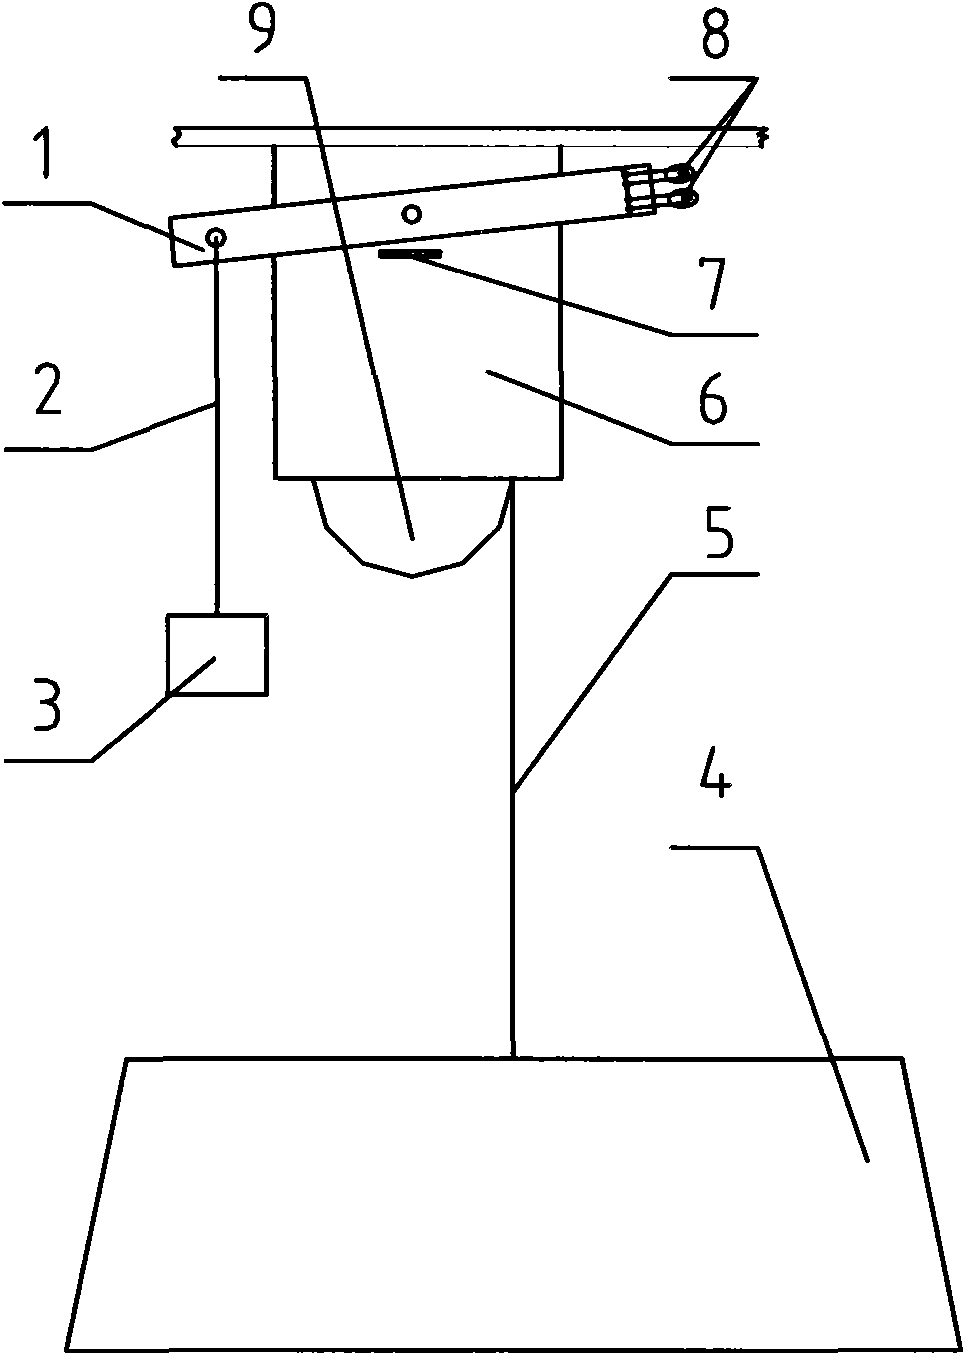 Lift control device of electric clothing storage cradle